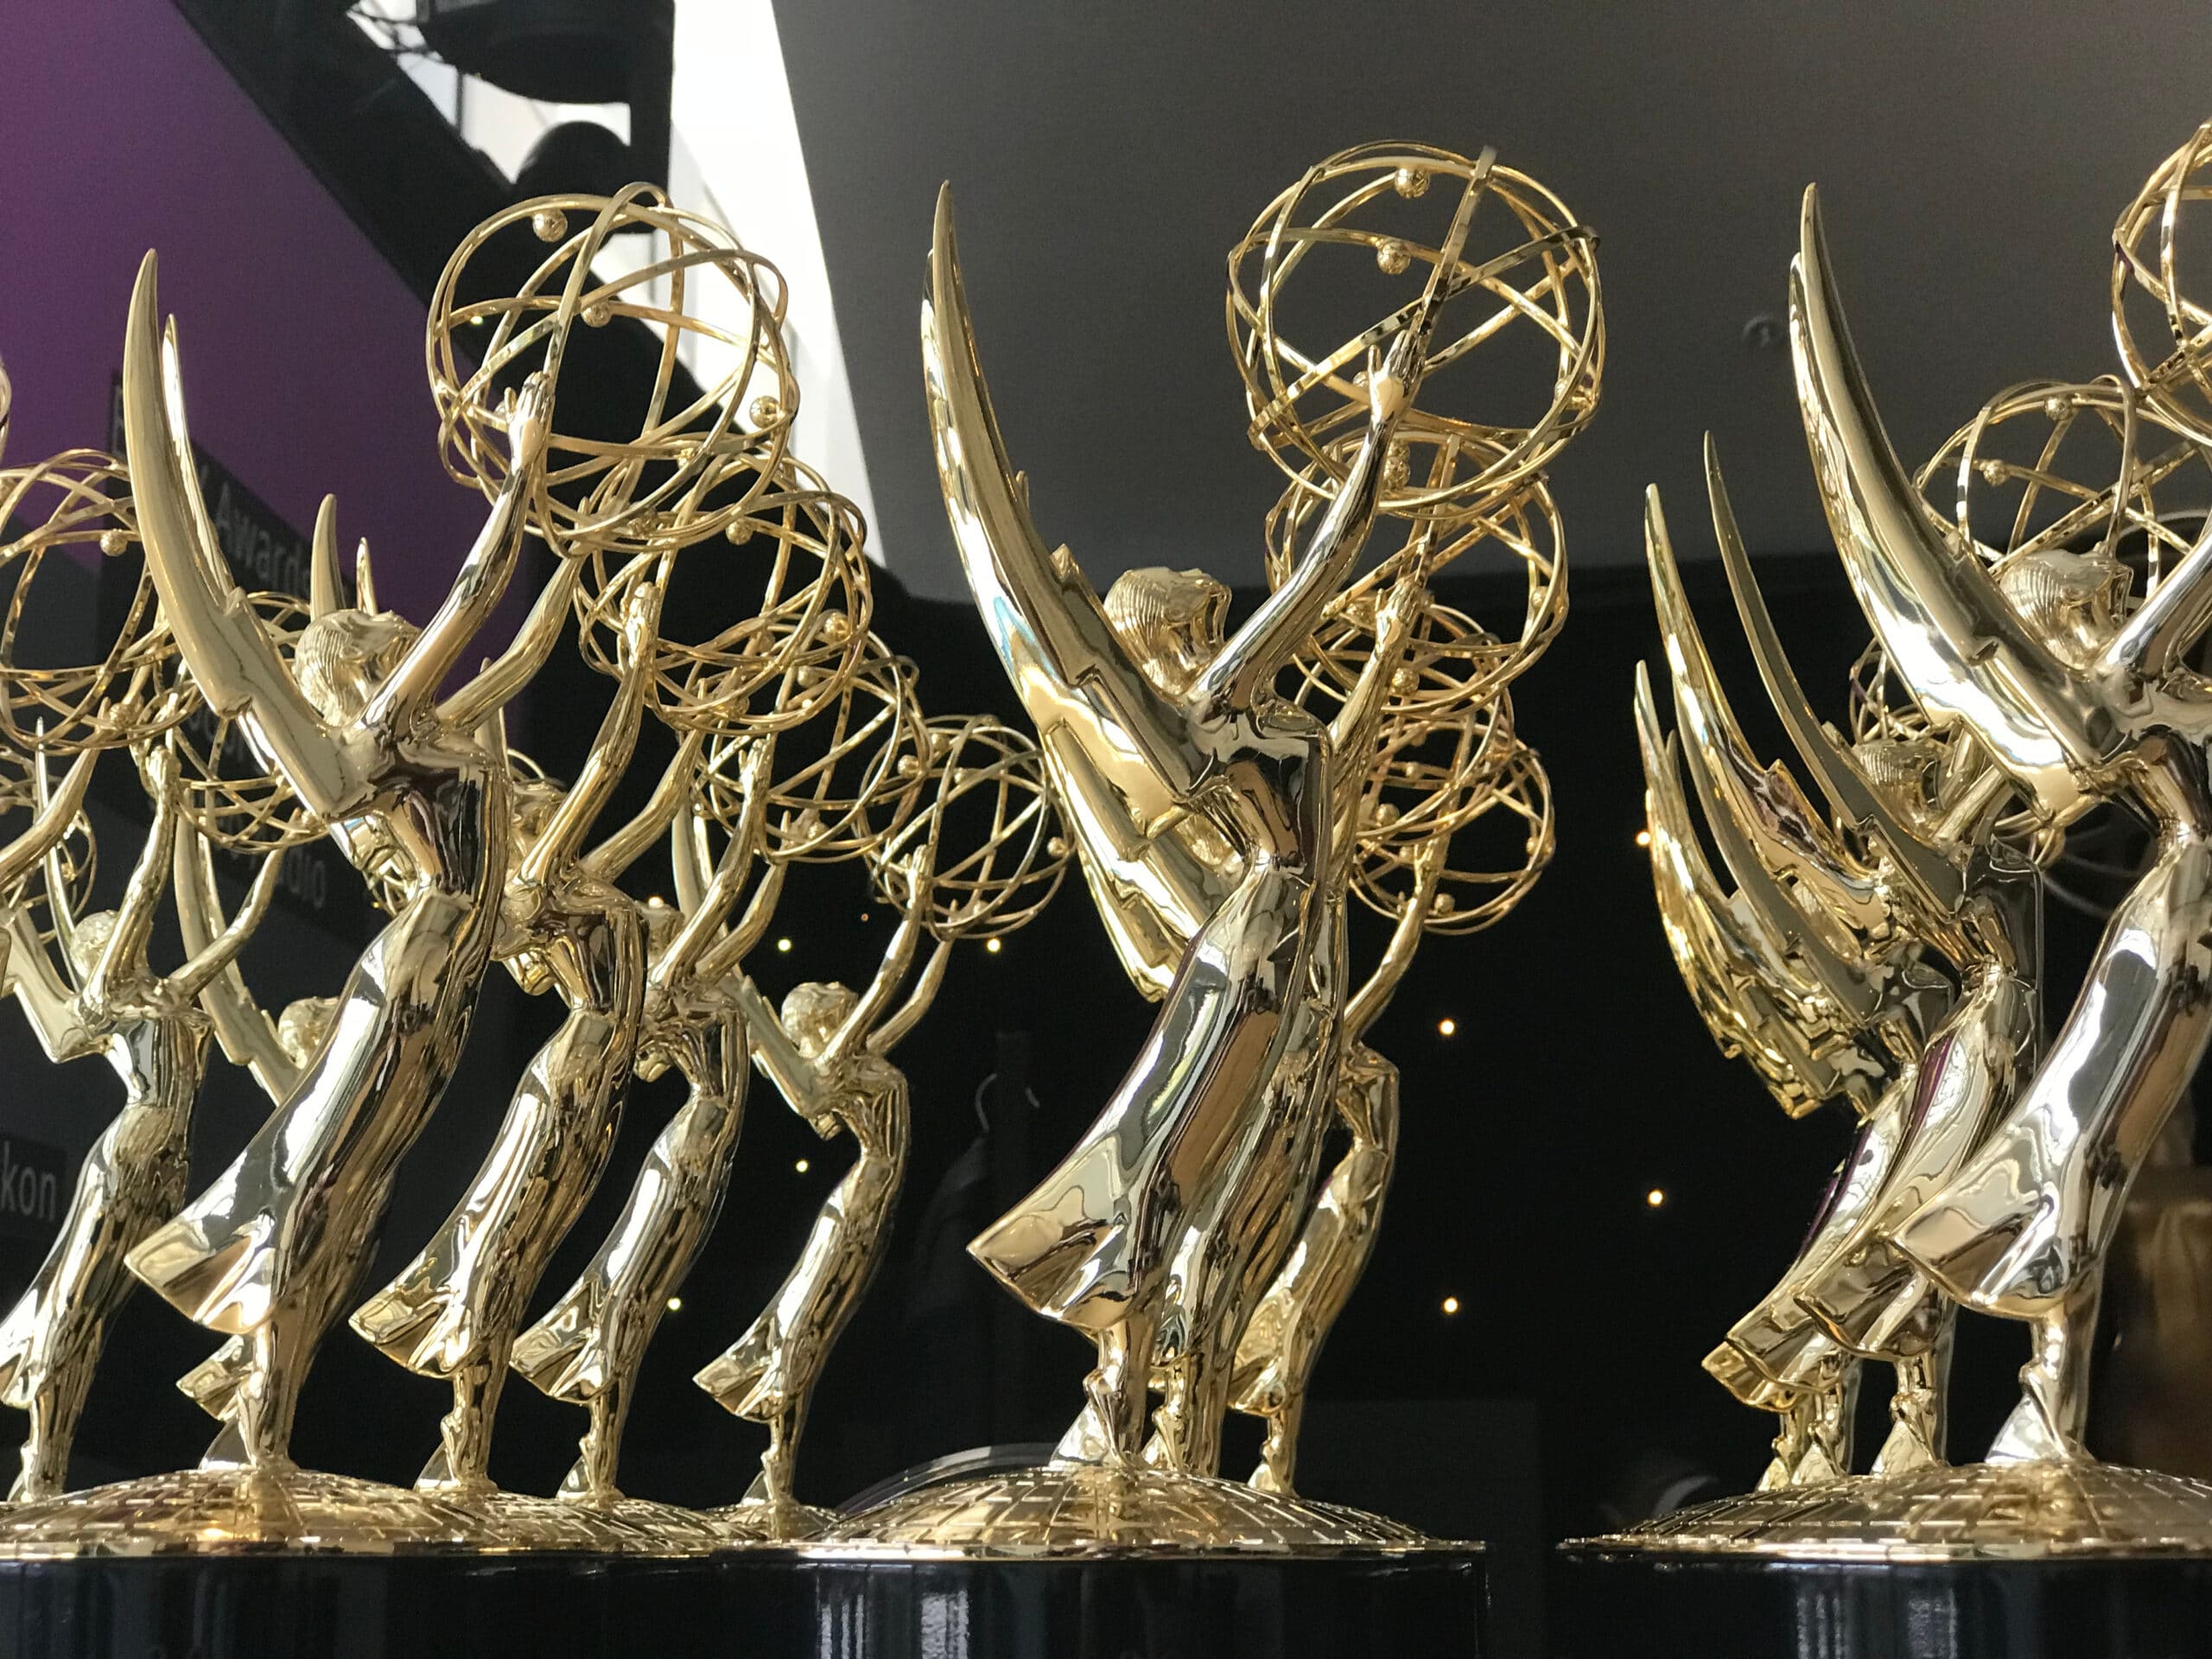 In February 2023, the Television Academy announced Outstanding Emerging Media Program as a new Emmy category (Joe Seer/Shutterstock)